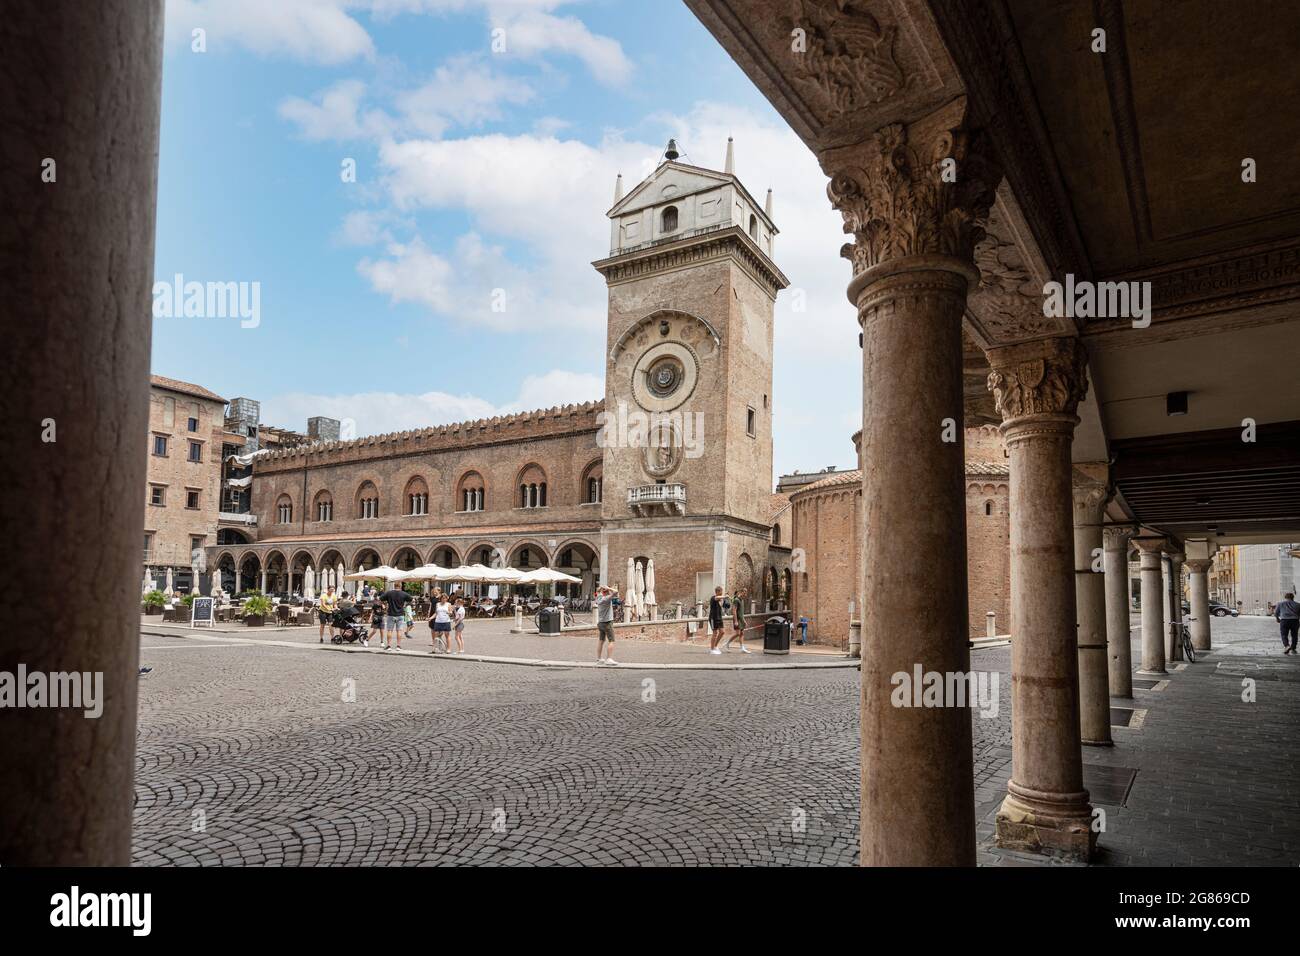 Mantua, Italy. July 13, 2021.  view of the clock tower in Piazza delle Erbe in the city center Stock Photo